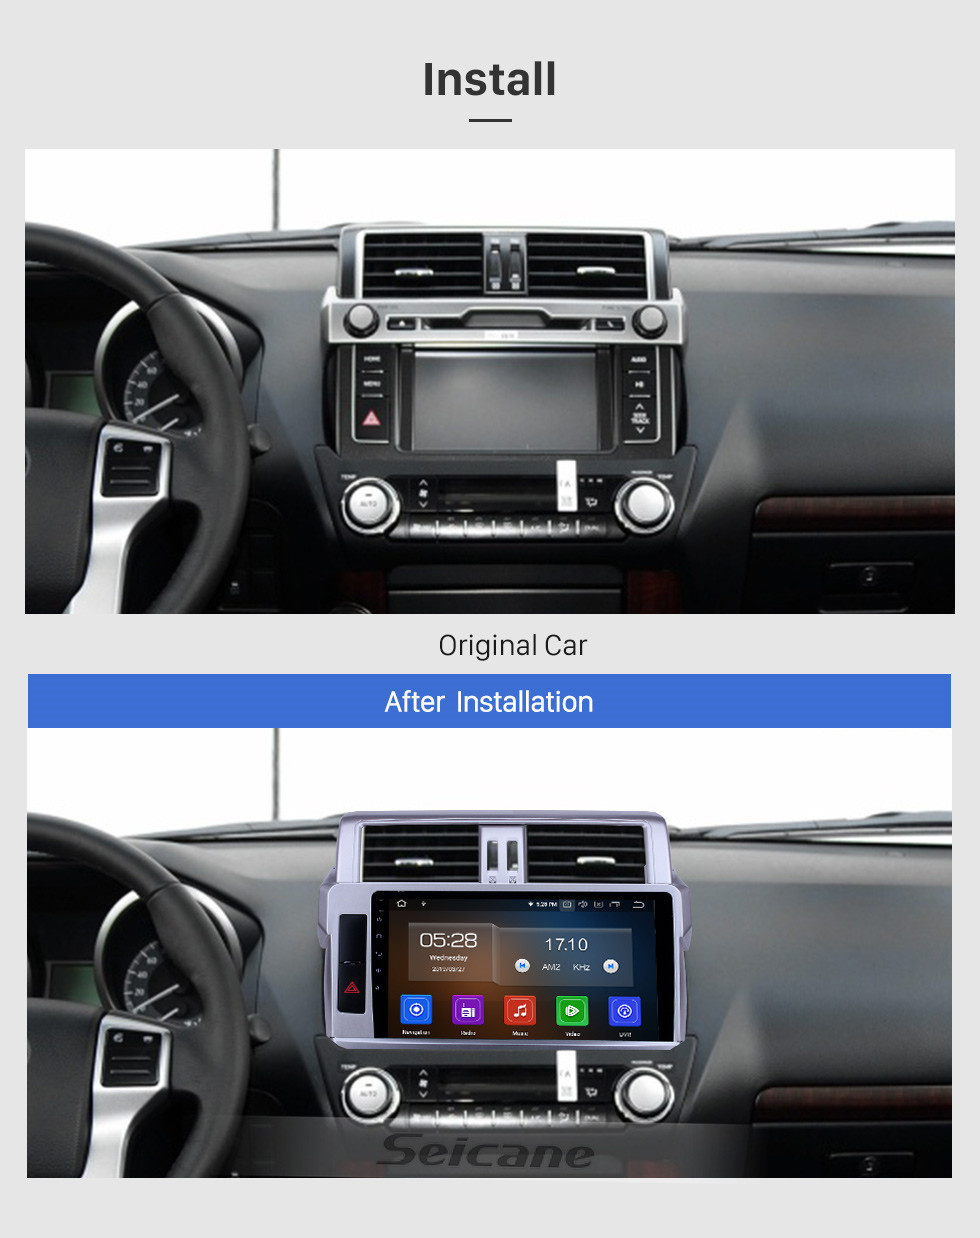 Seicane Android 12.0 10.1 inch GPS Navigation Radio for 2014 2015-2017 Toyota Prado with HD Touchscreen Carplay Bluetooth support Digital TV